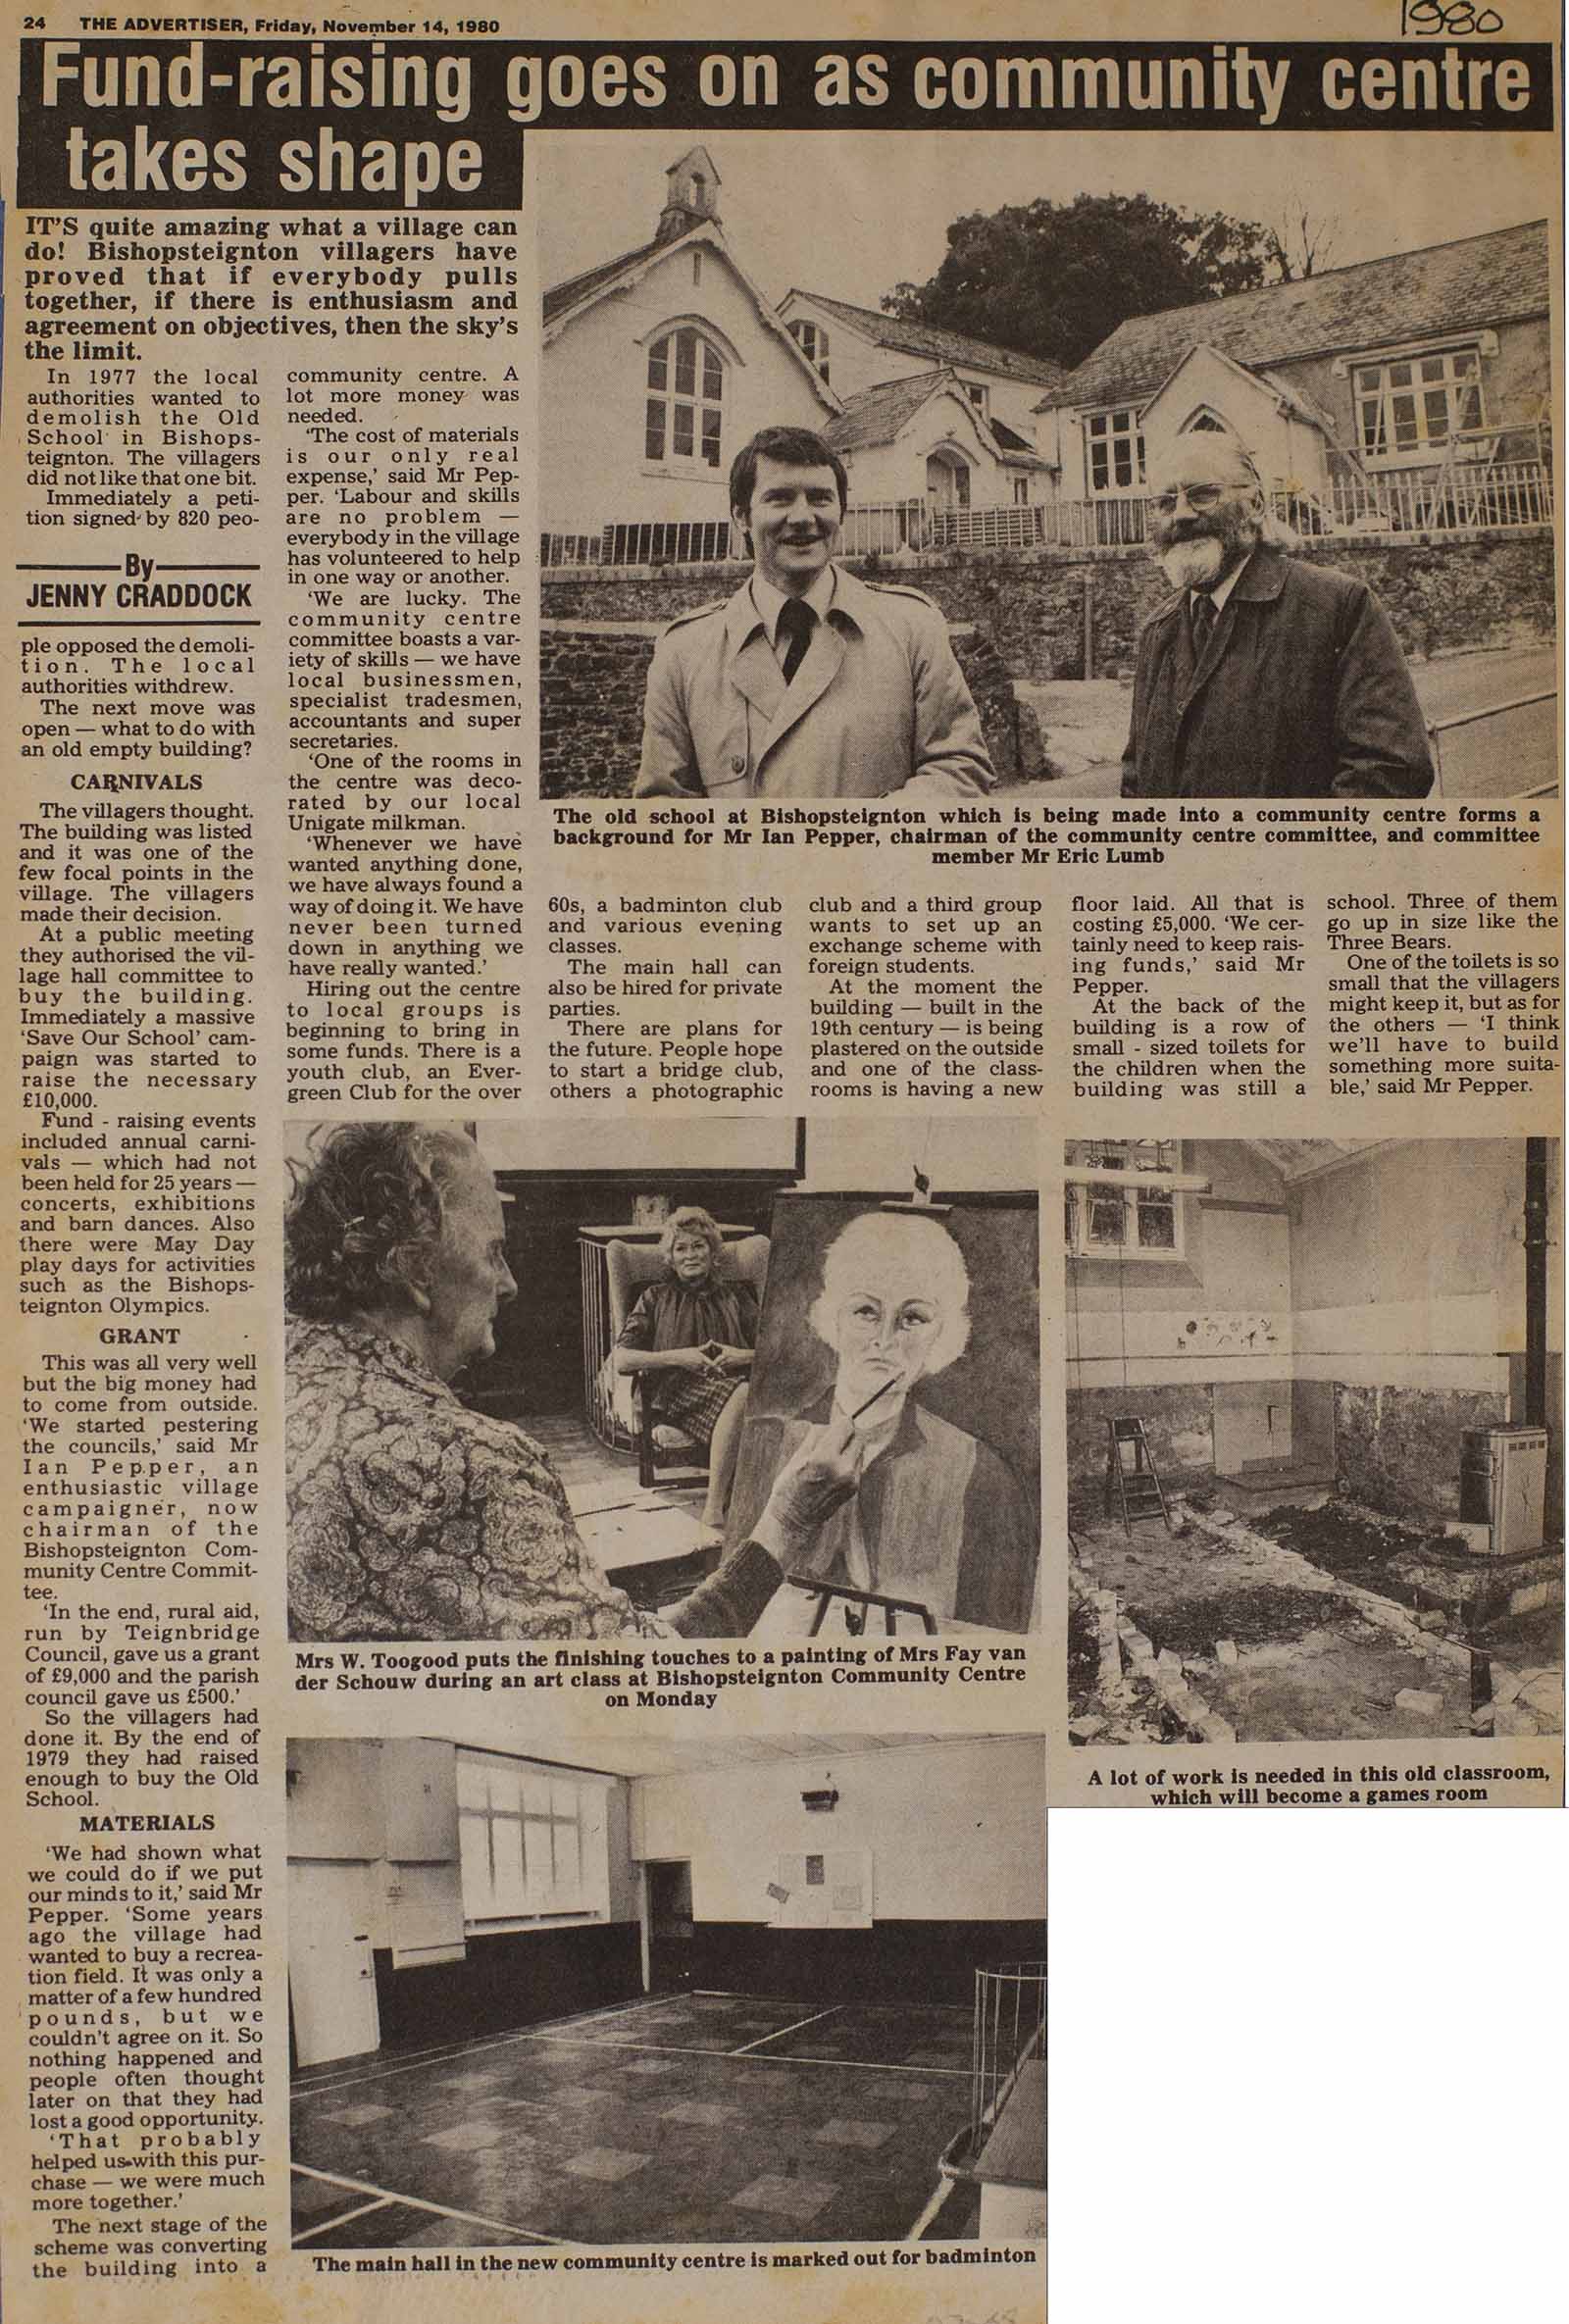 Newspaper Clipping on Bishopsteignton Community Centre Fundraising